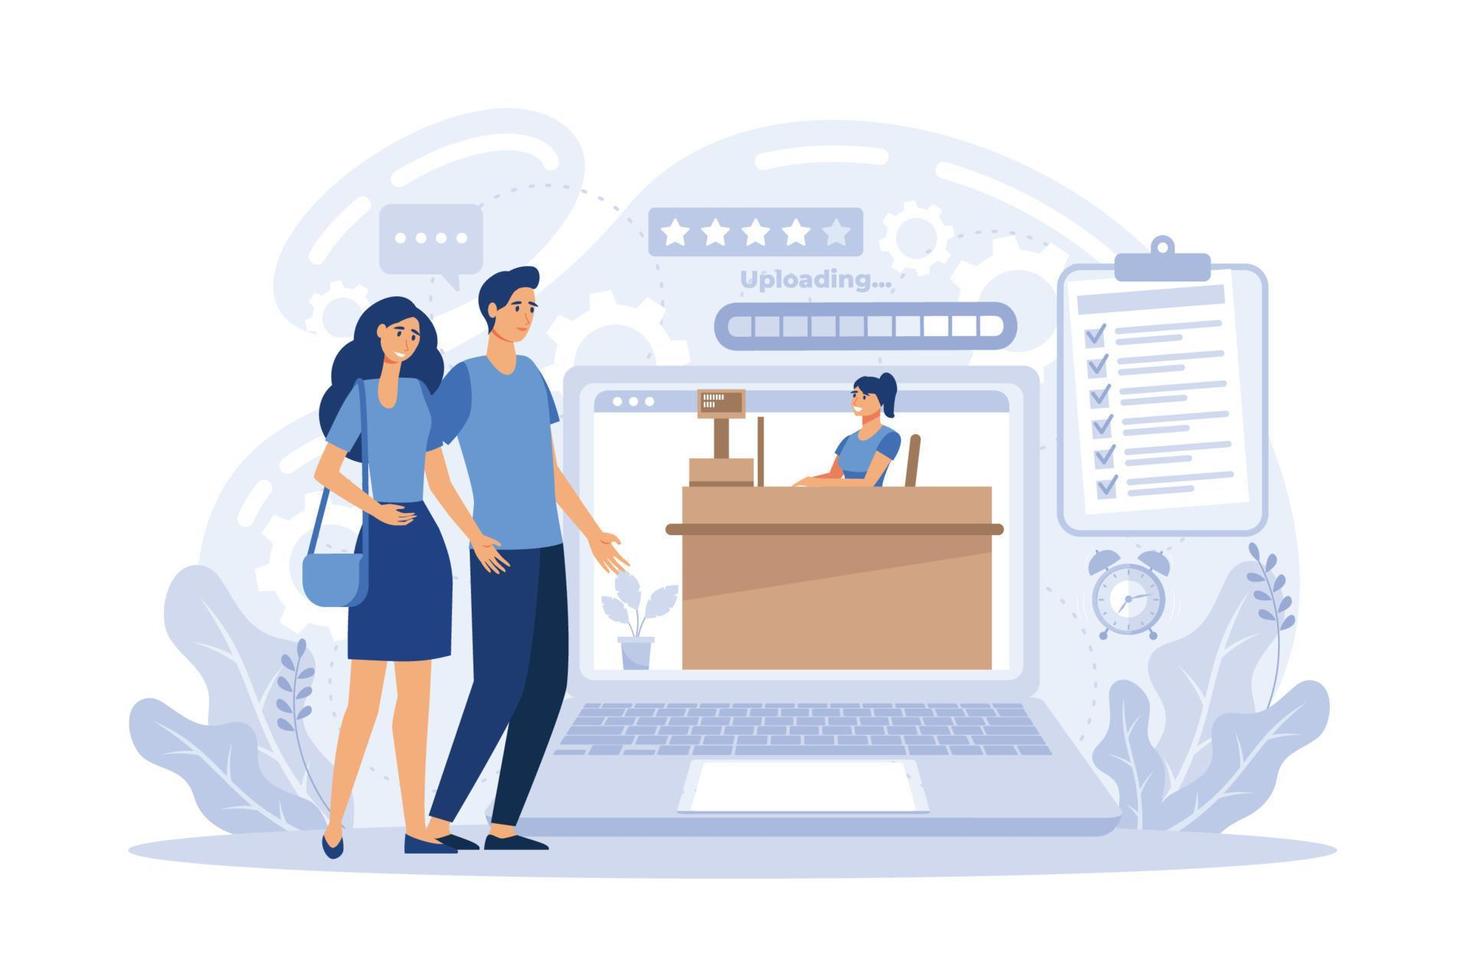 Enter login and password. Registration page on screen. Sign in to your account creative metaphor. Login page. Mobile app with user page. flat vector illustration